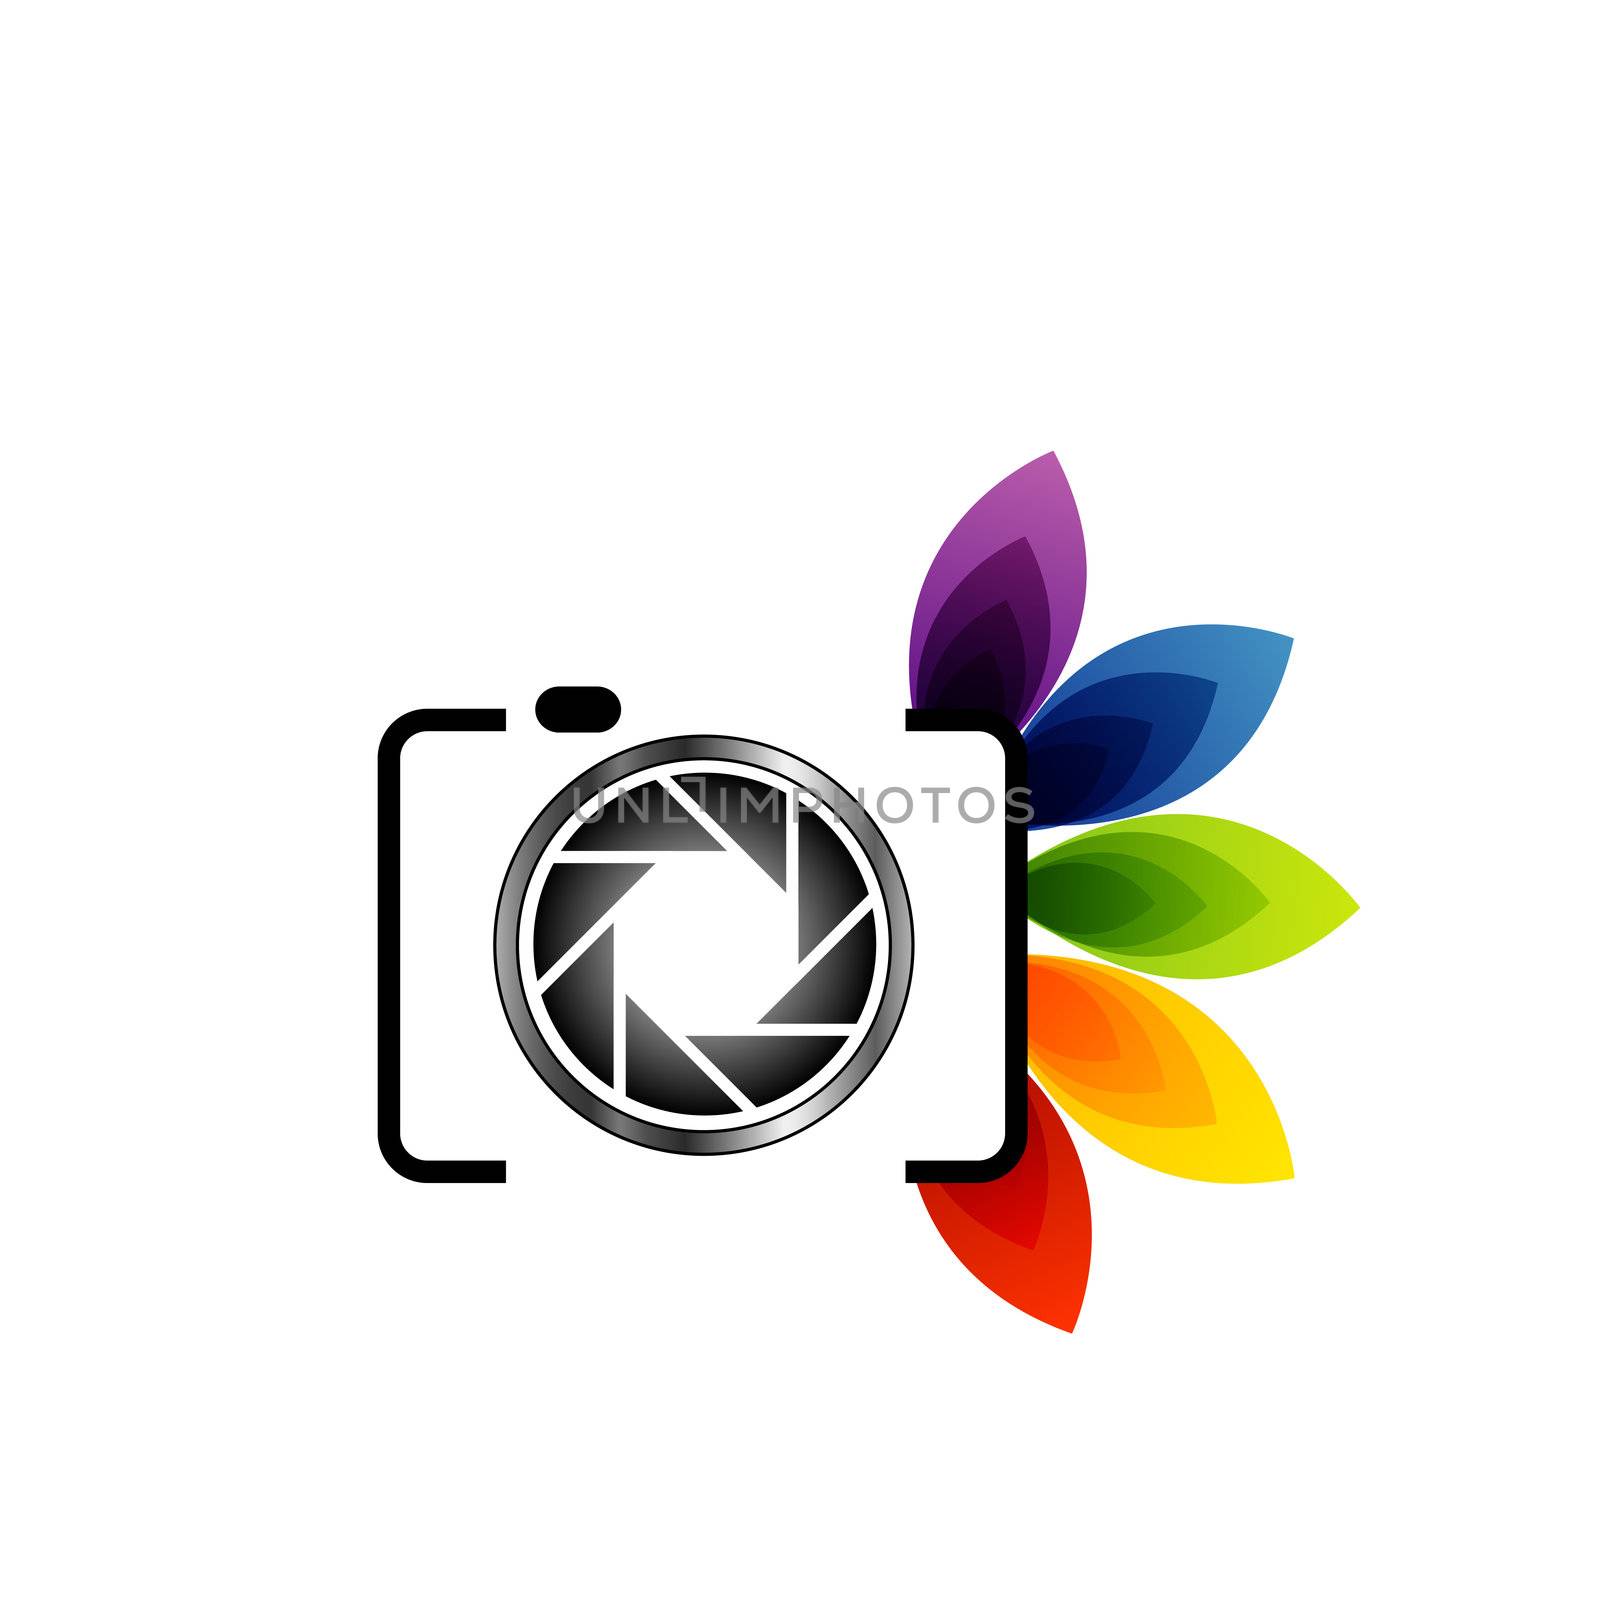 Photography logo with colorful leaves